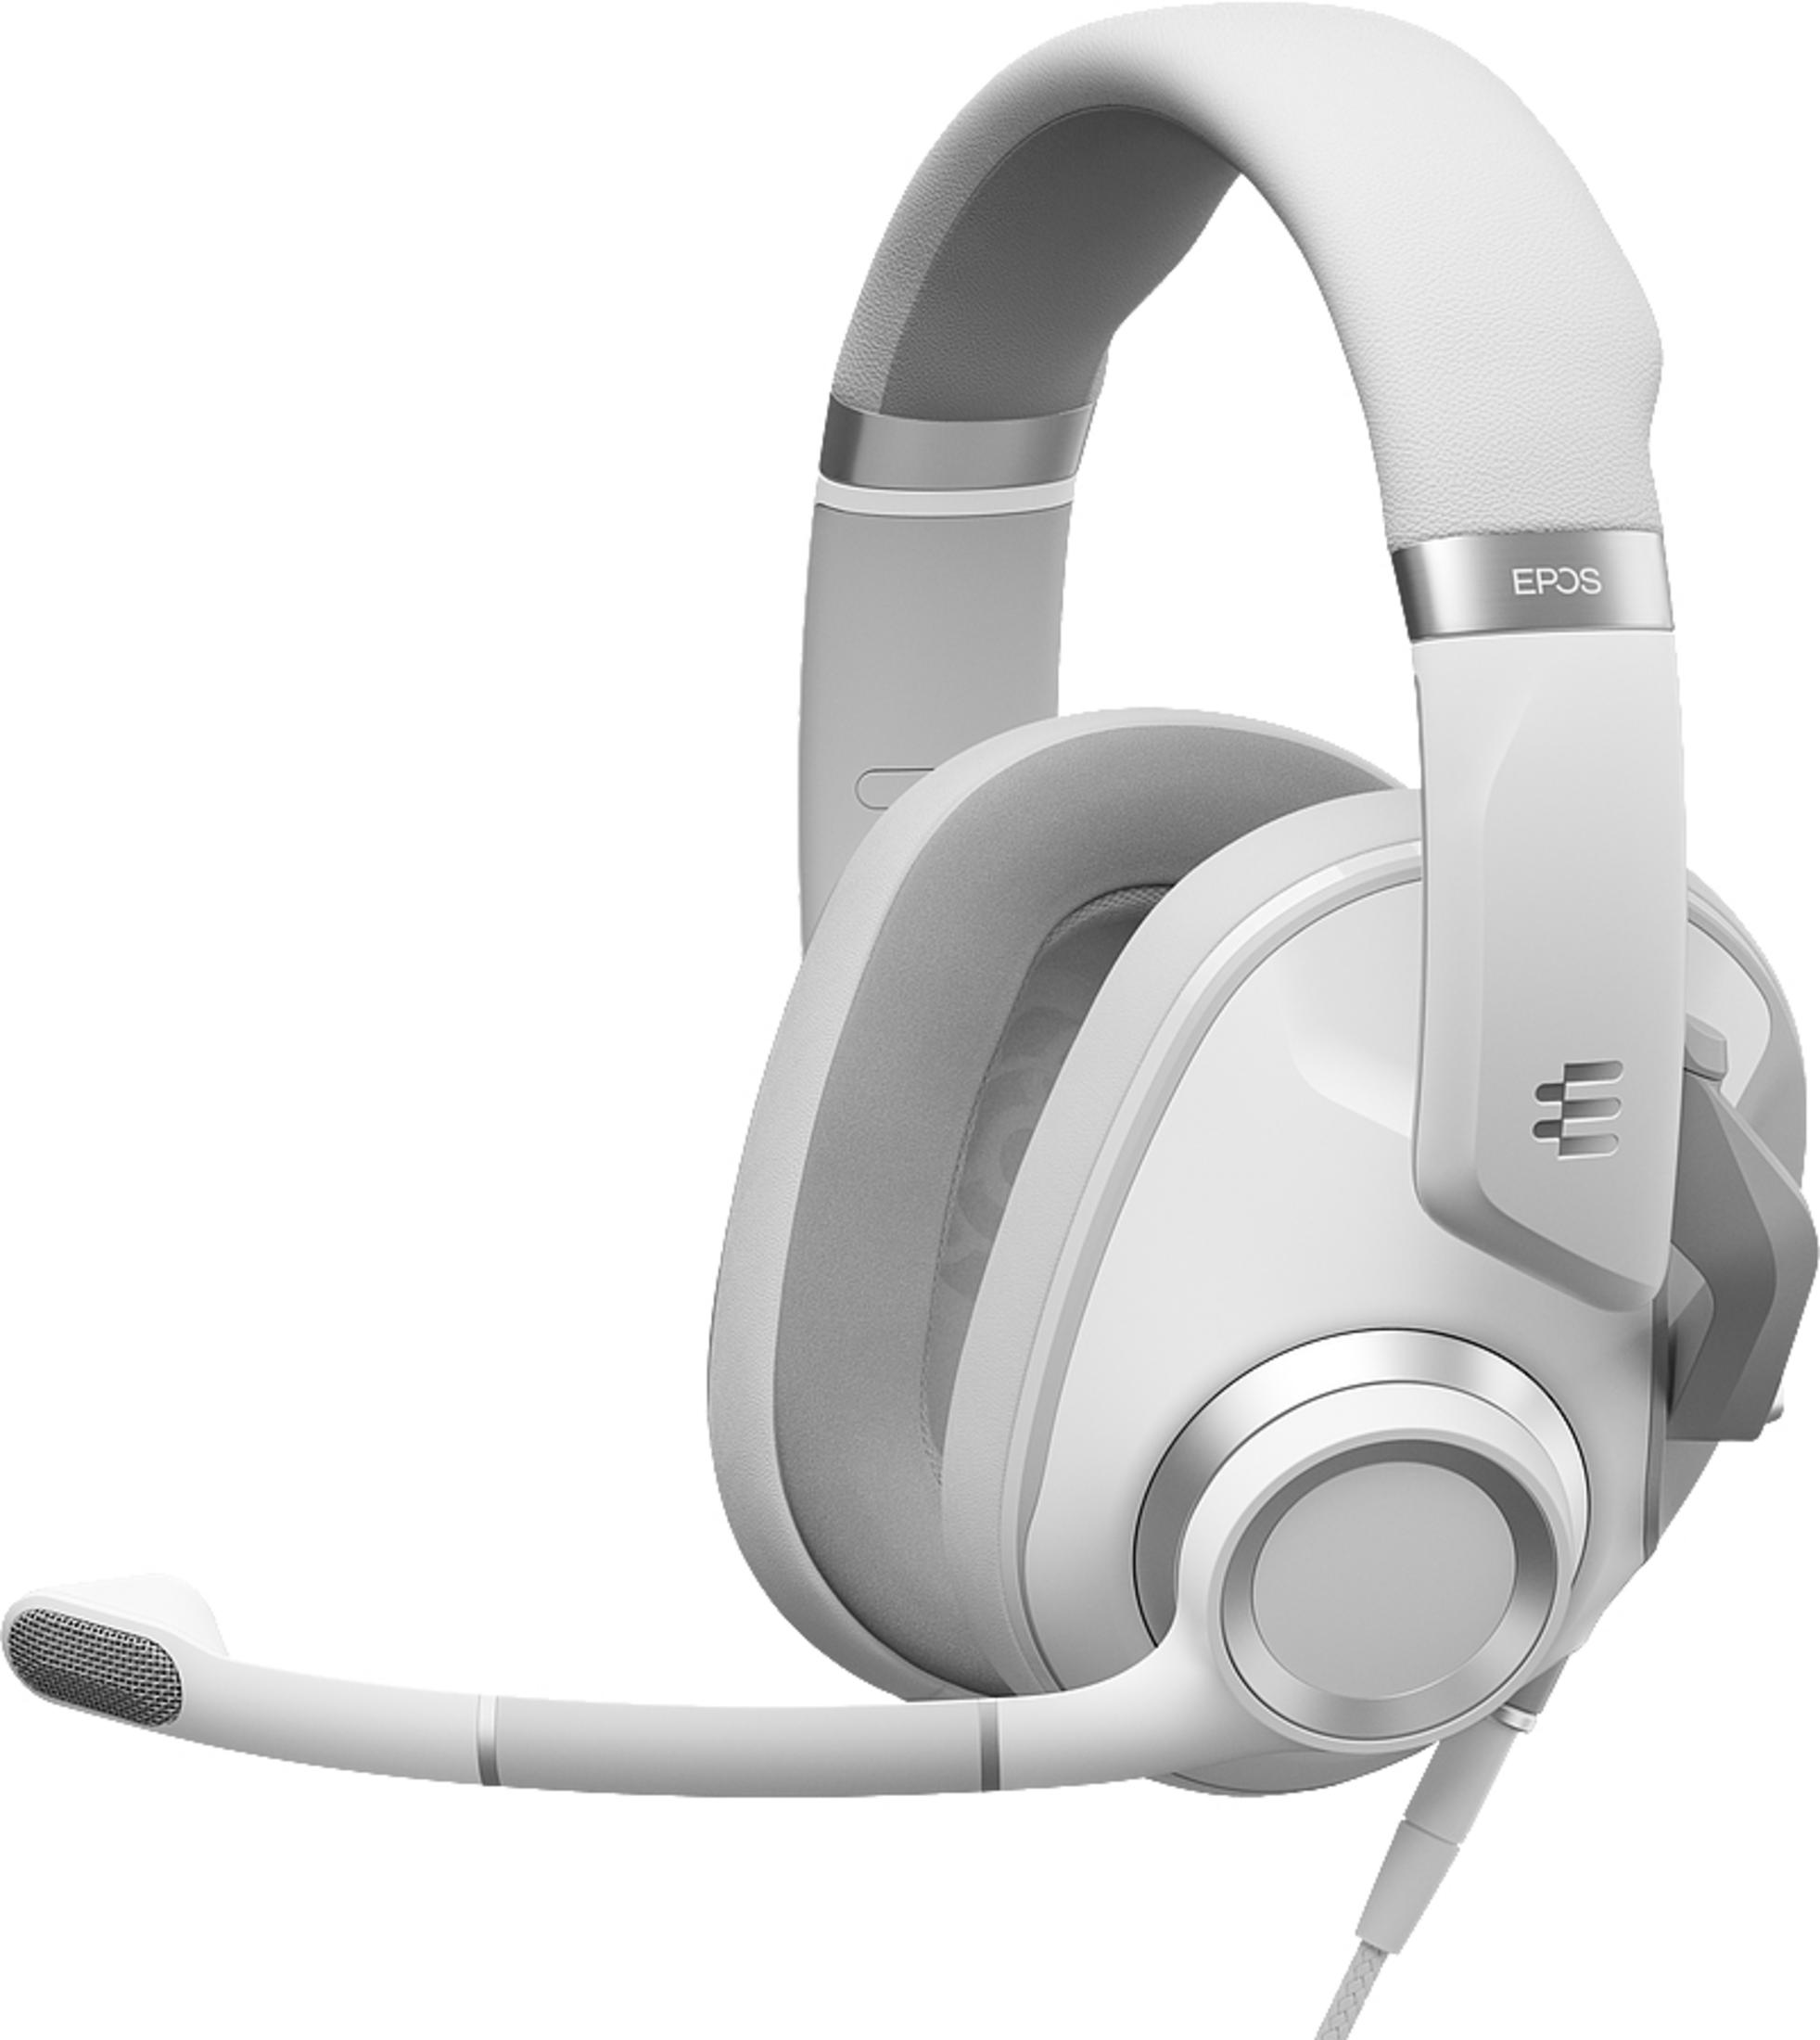 H6 Gaming WEISS, EPOS Over-ear PRO White Headset 1000969 Ghost CLOSED